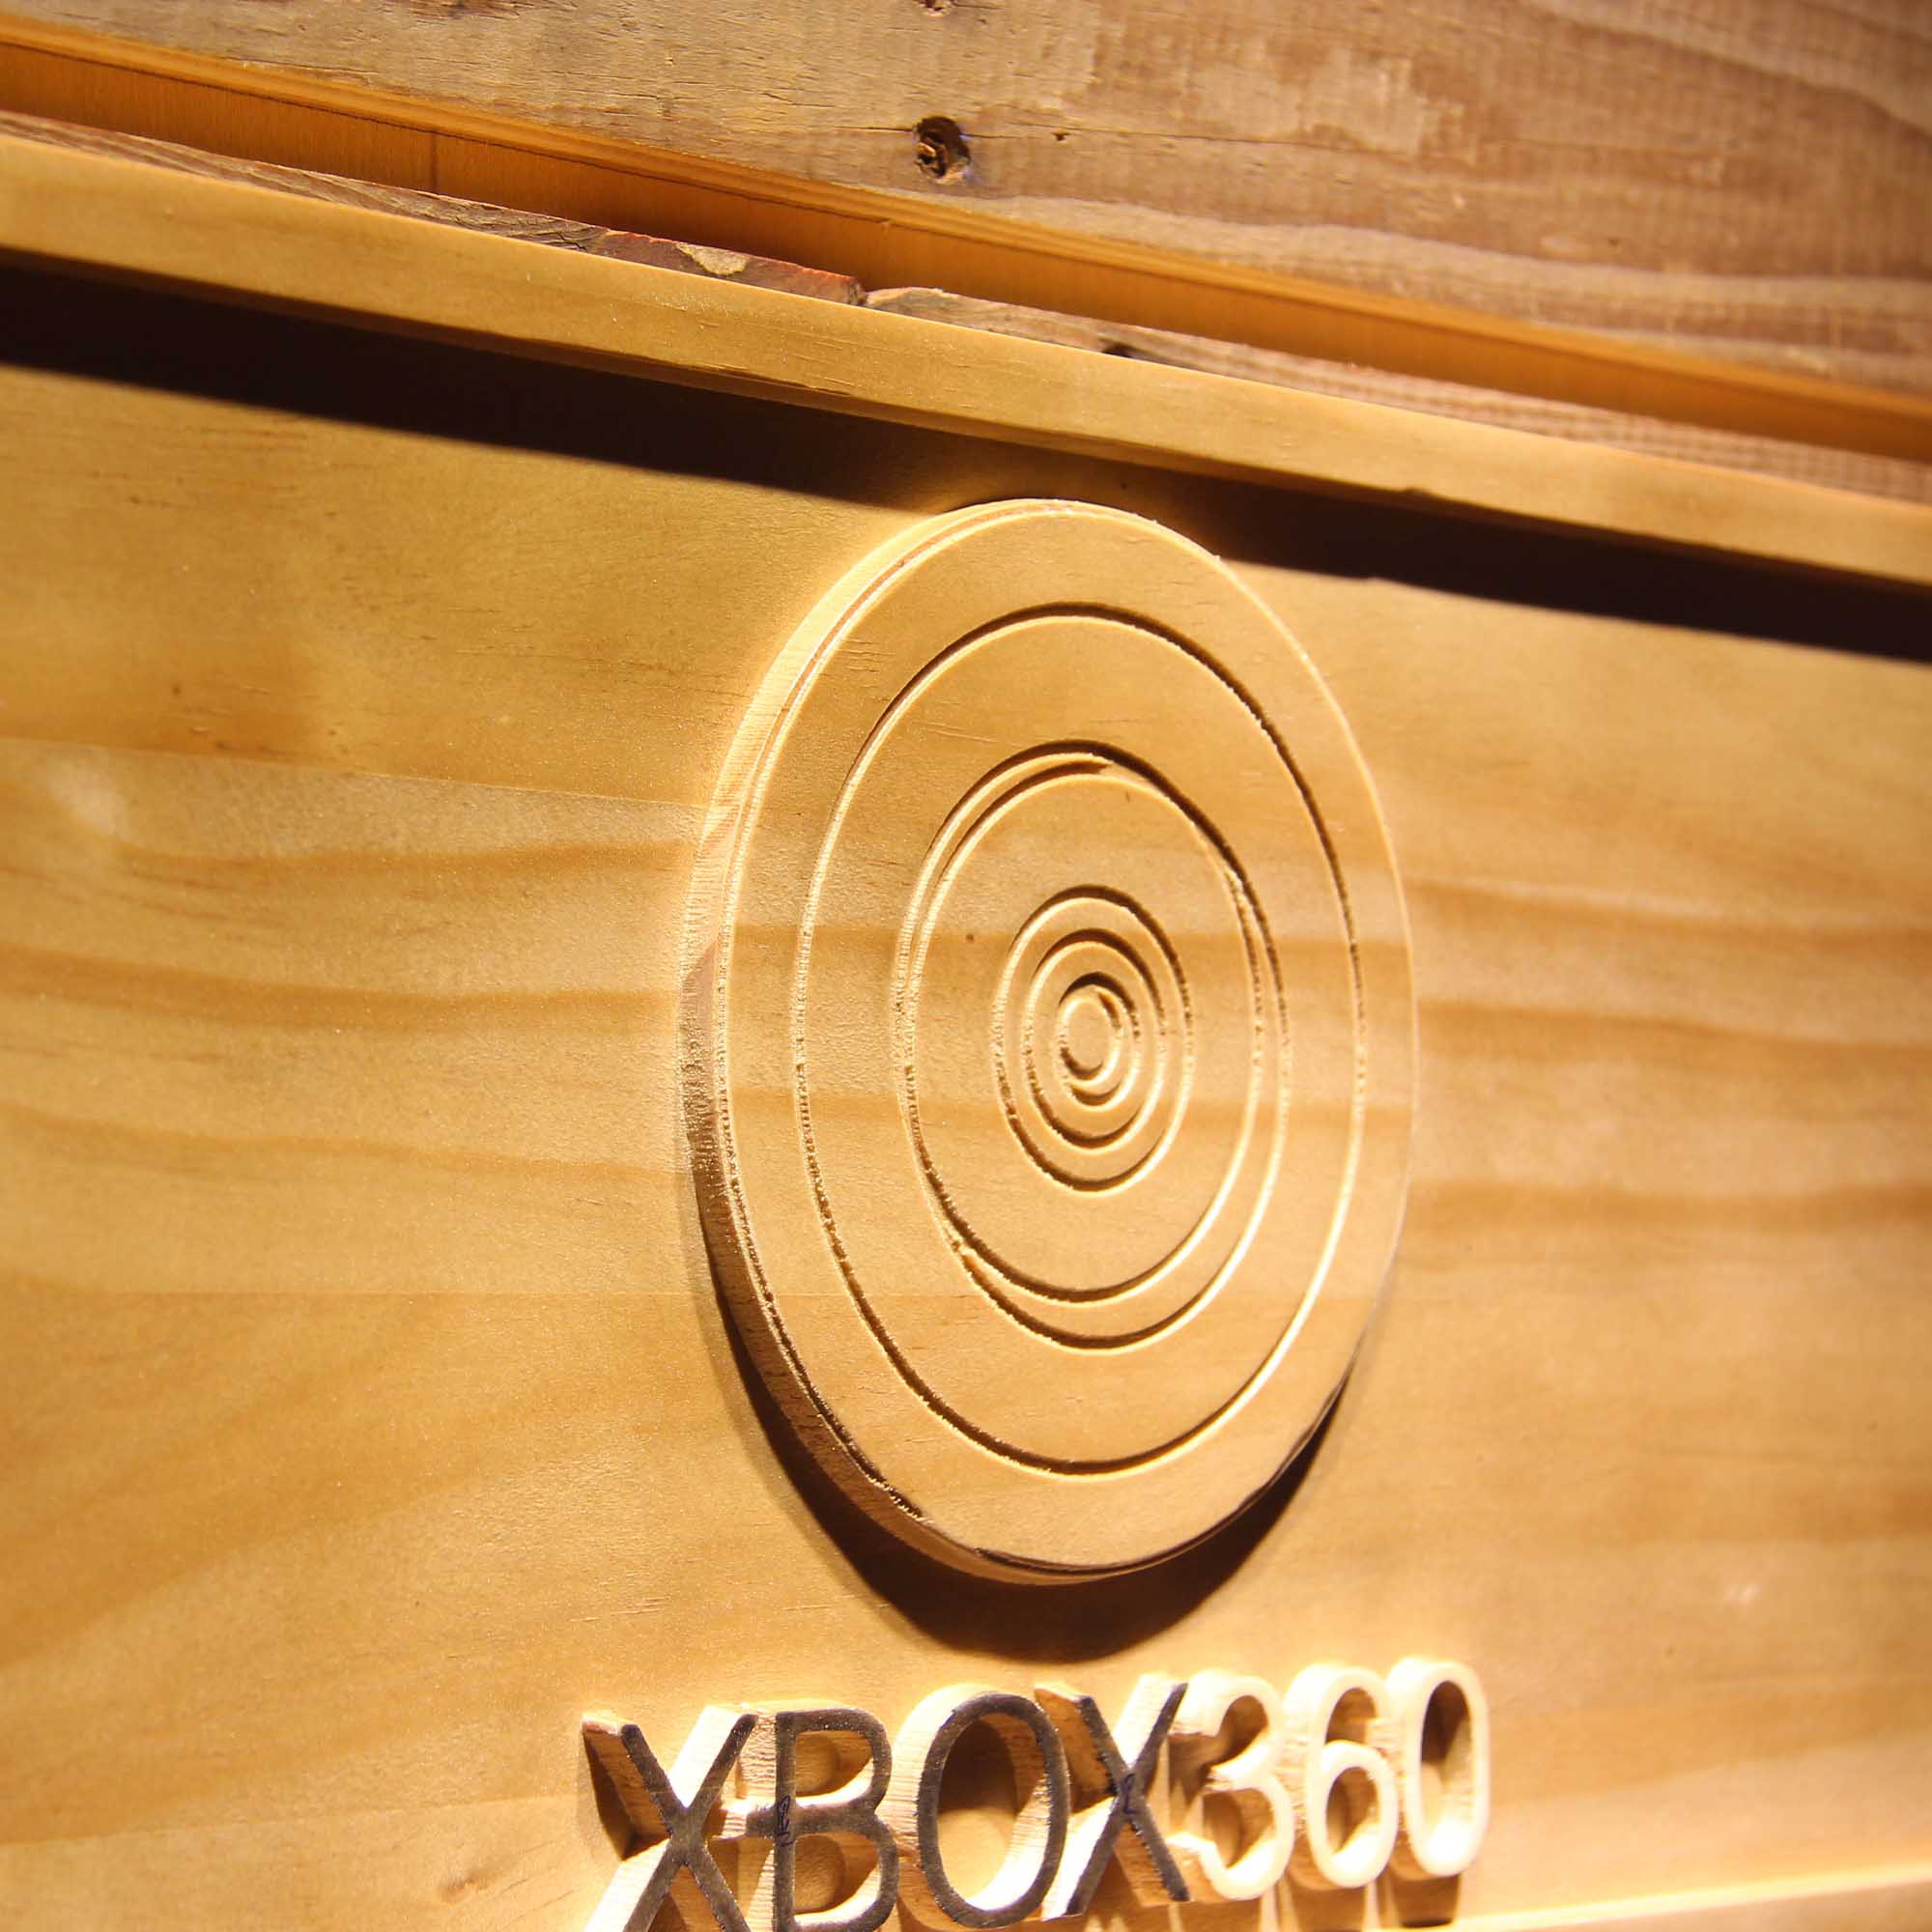 Xbox 360 Man Cave 3D Wooden Engrave Sign